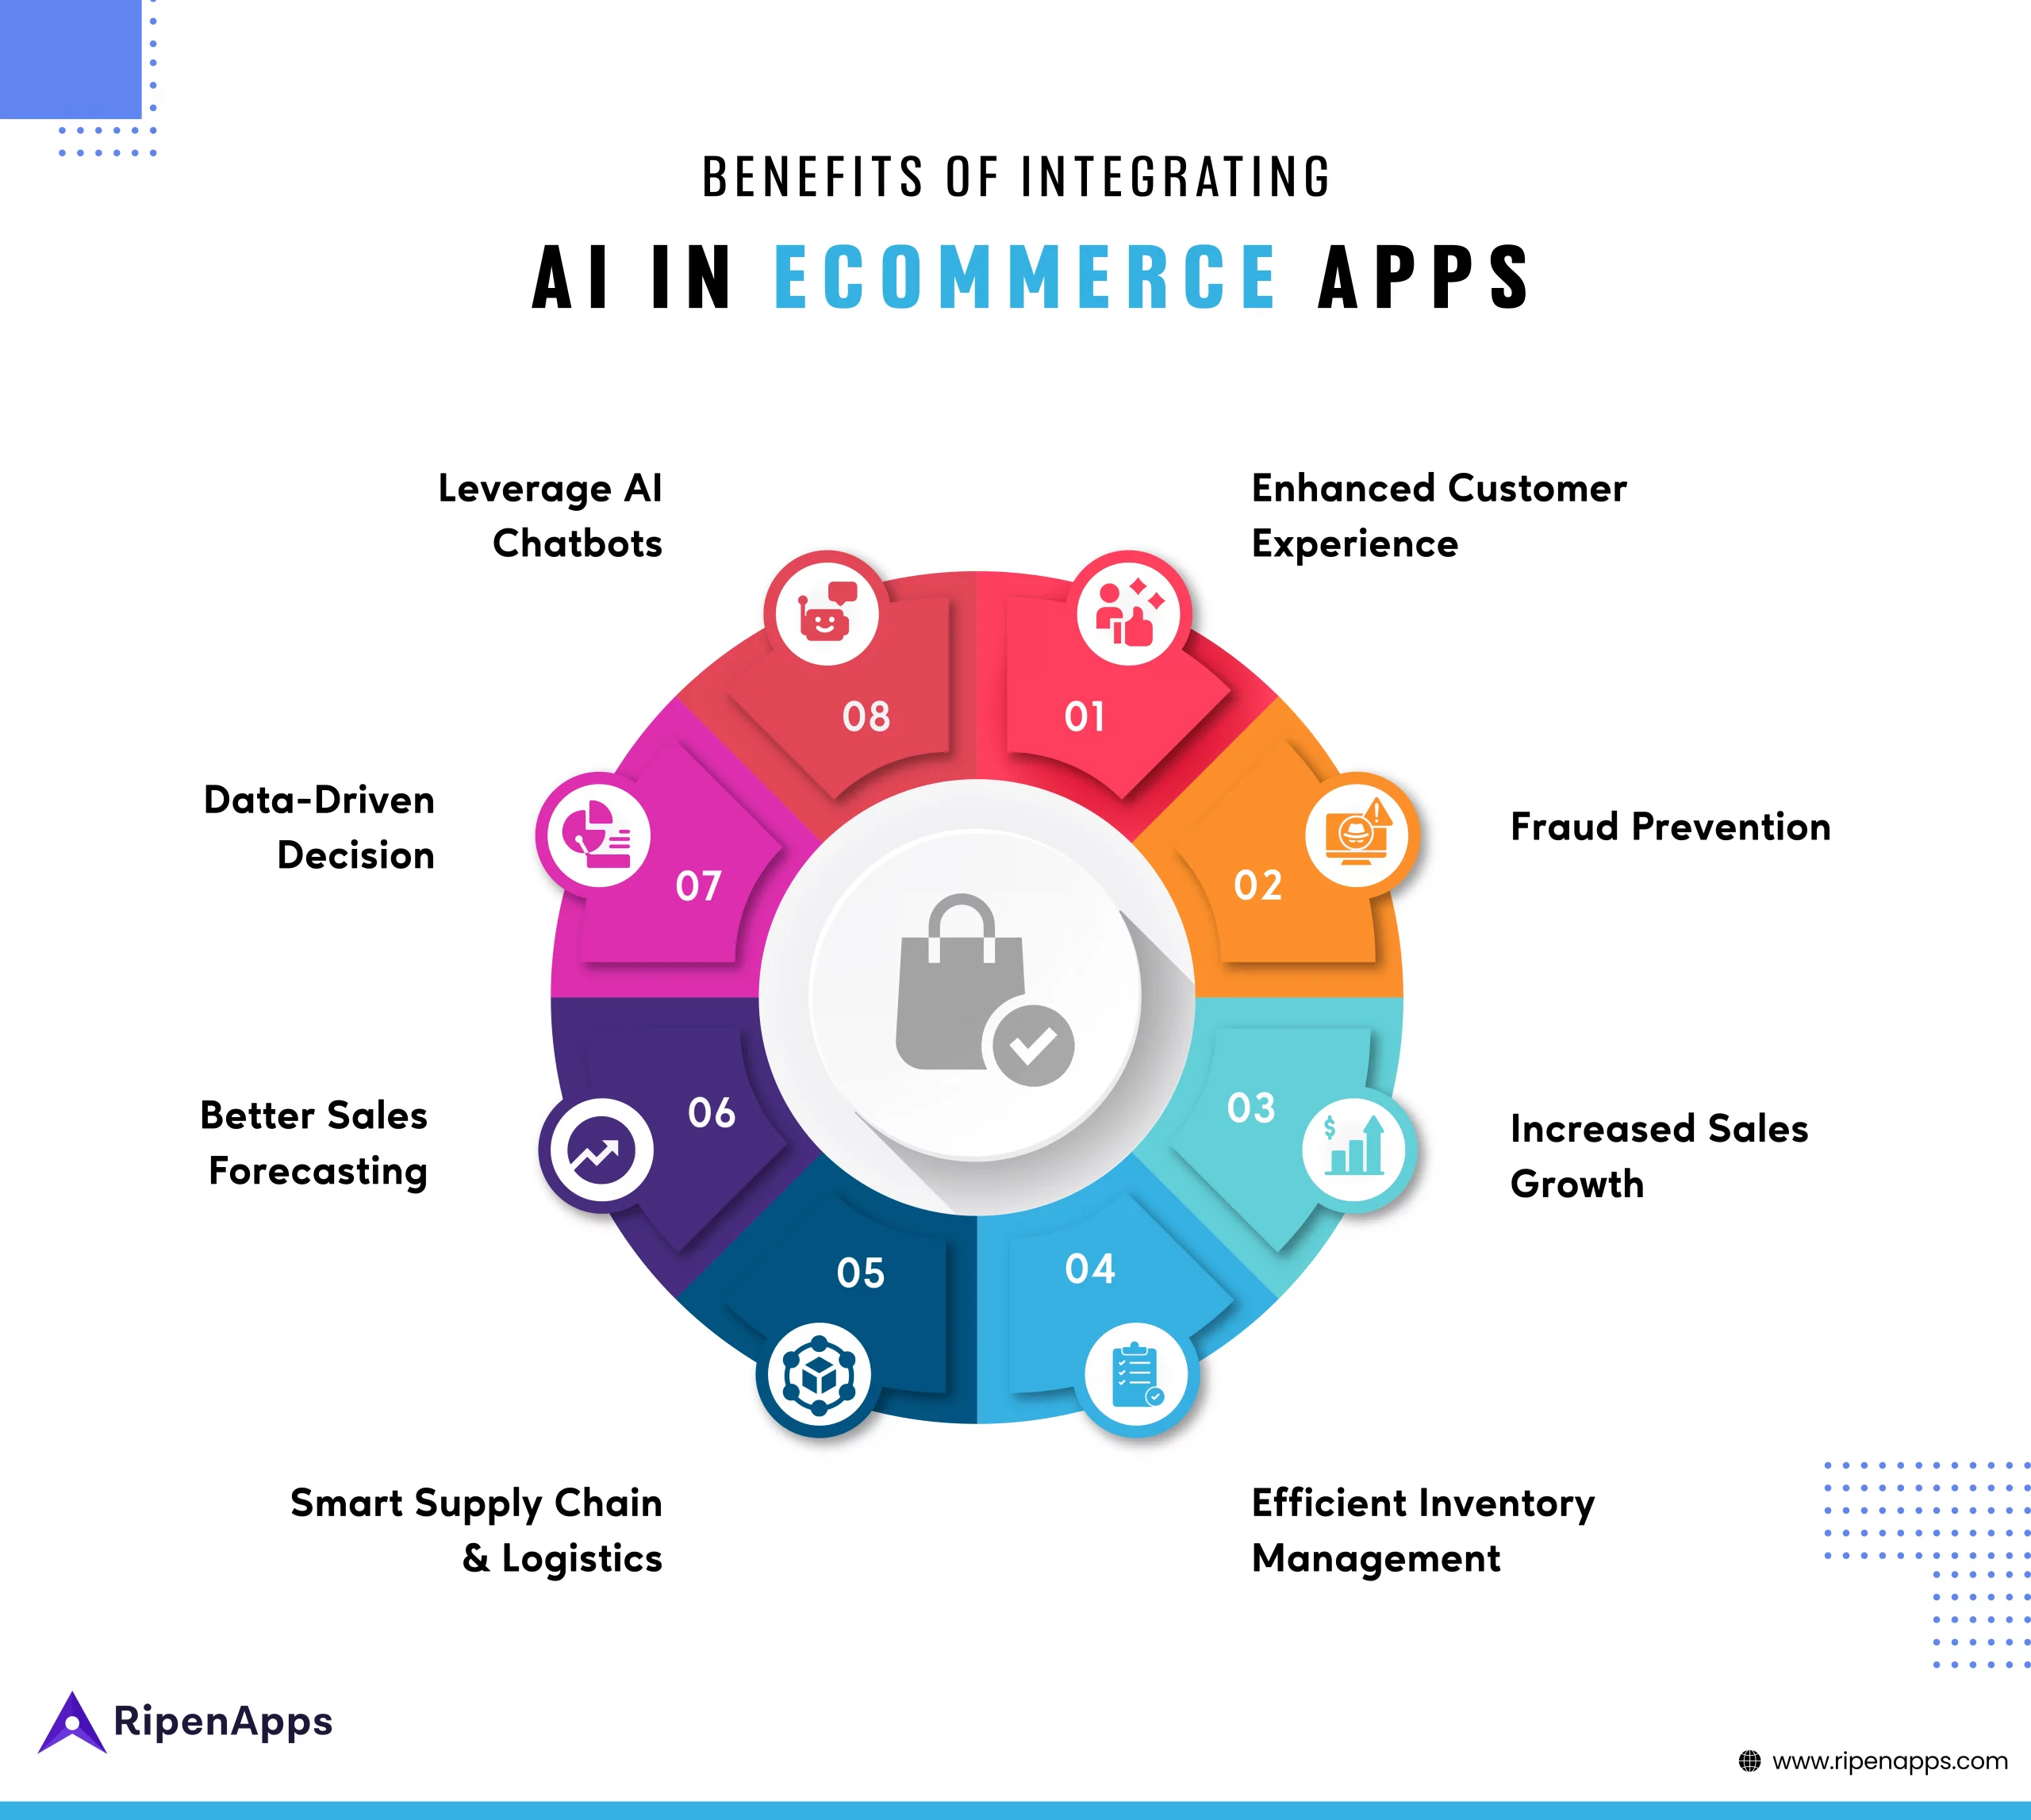 Benefits of Integrating AI in eCommerce mobile Apps 